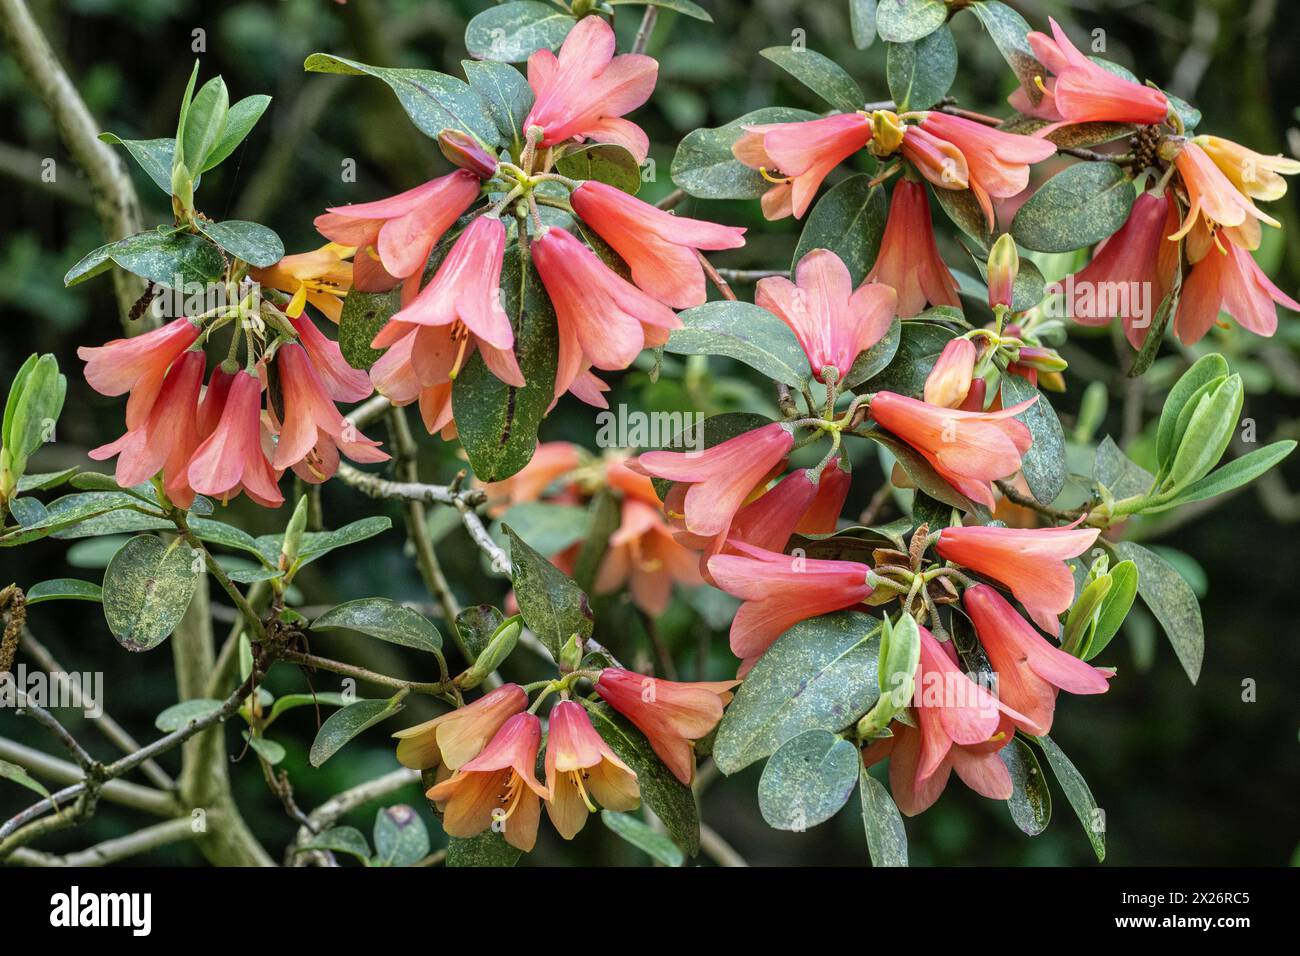 Rhododendron flower (Rhododendron concatenans), Emsland, Lower Saxony, Germany Stock Photo